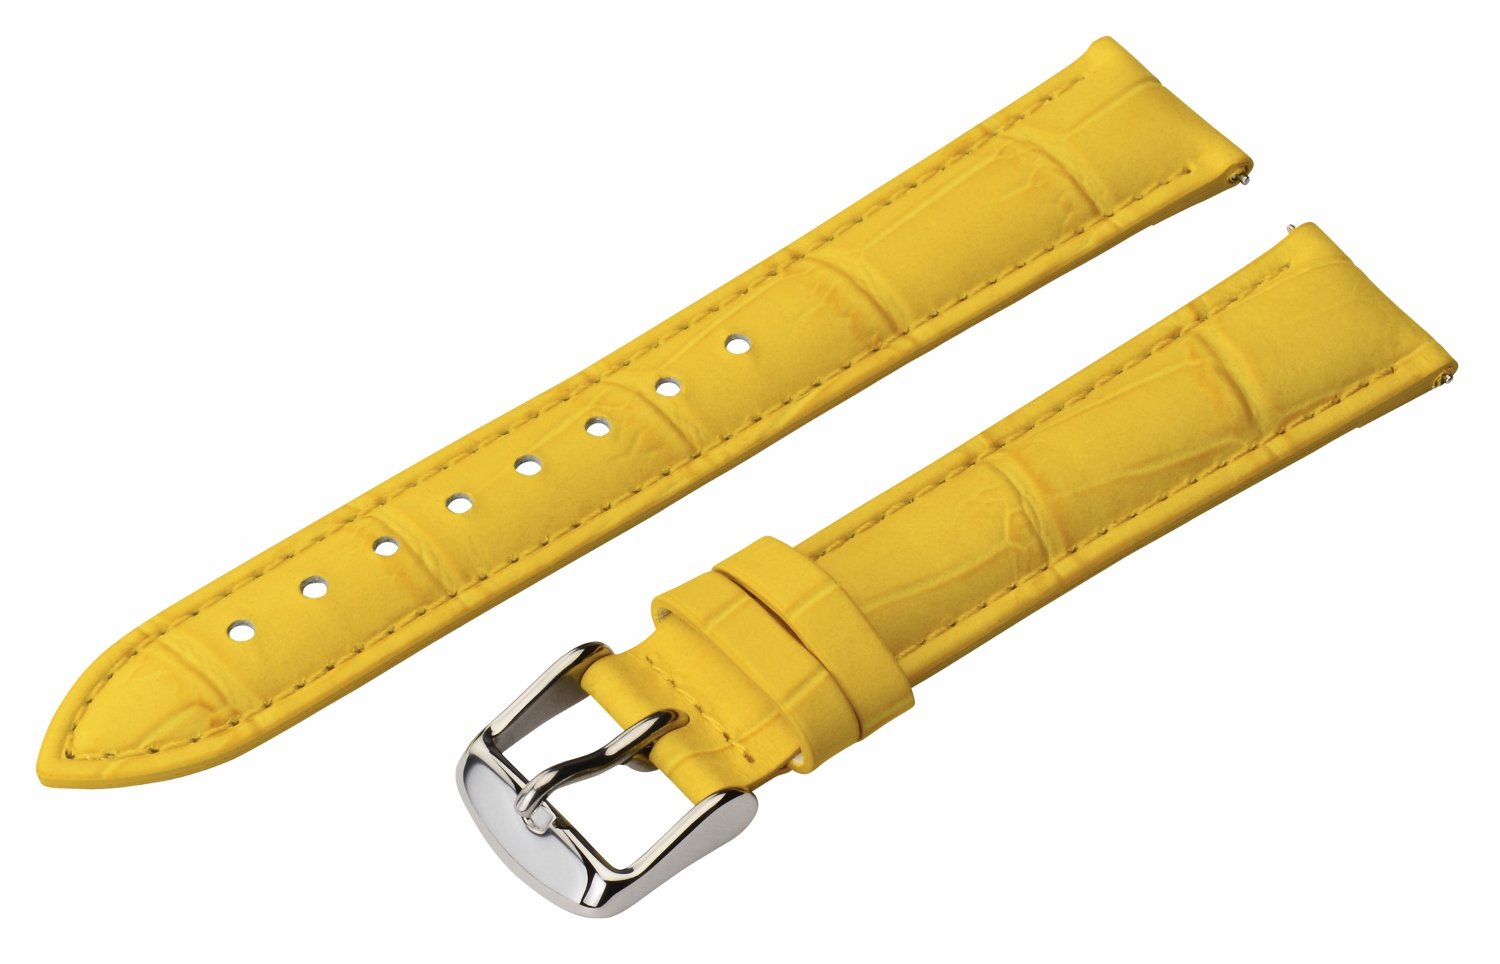 Clockwork Synergy - 2 Piece Ss Leather Classic Croco Grain Interchangeable Replacement Watch Band Strap 16mm - Solid Yellow - Men Women